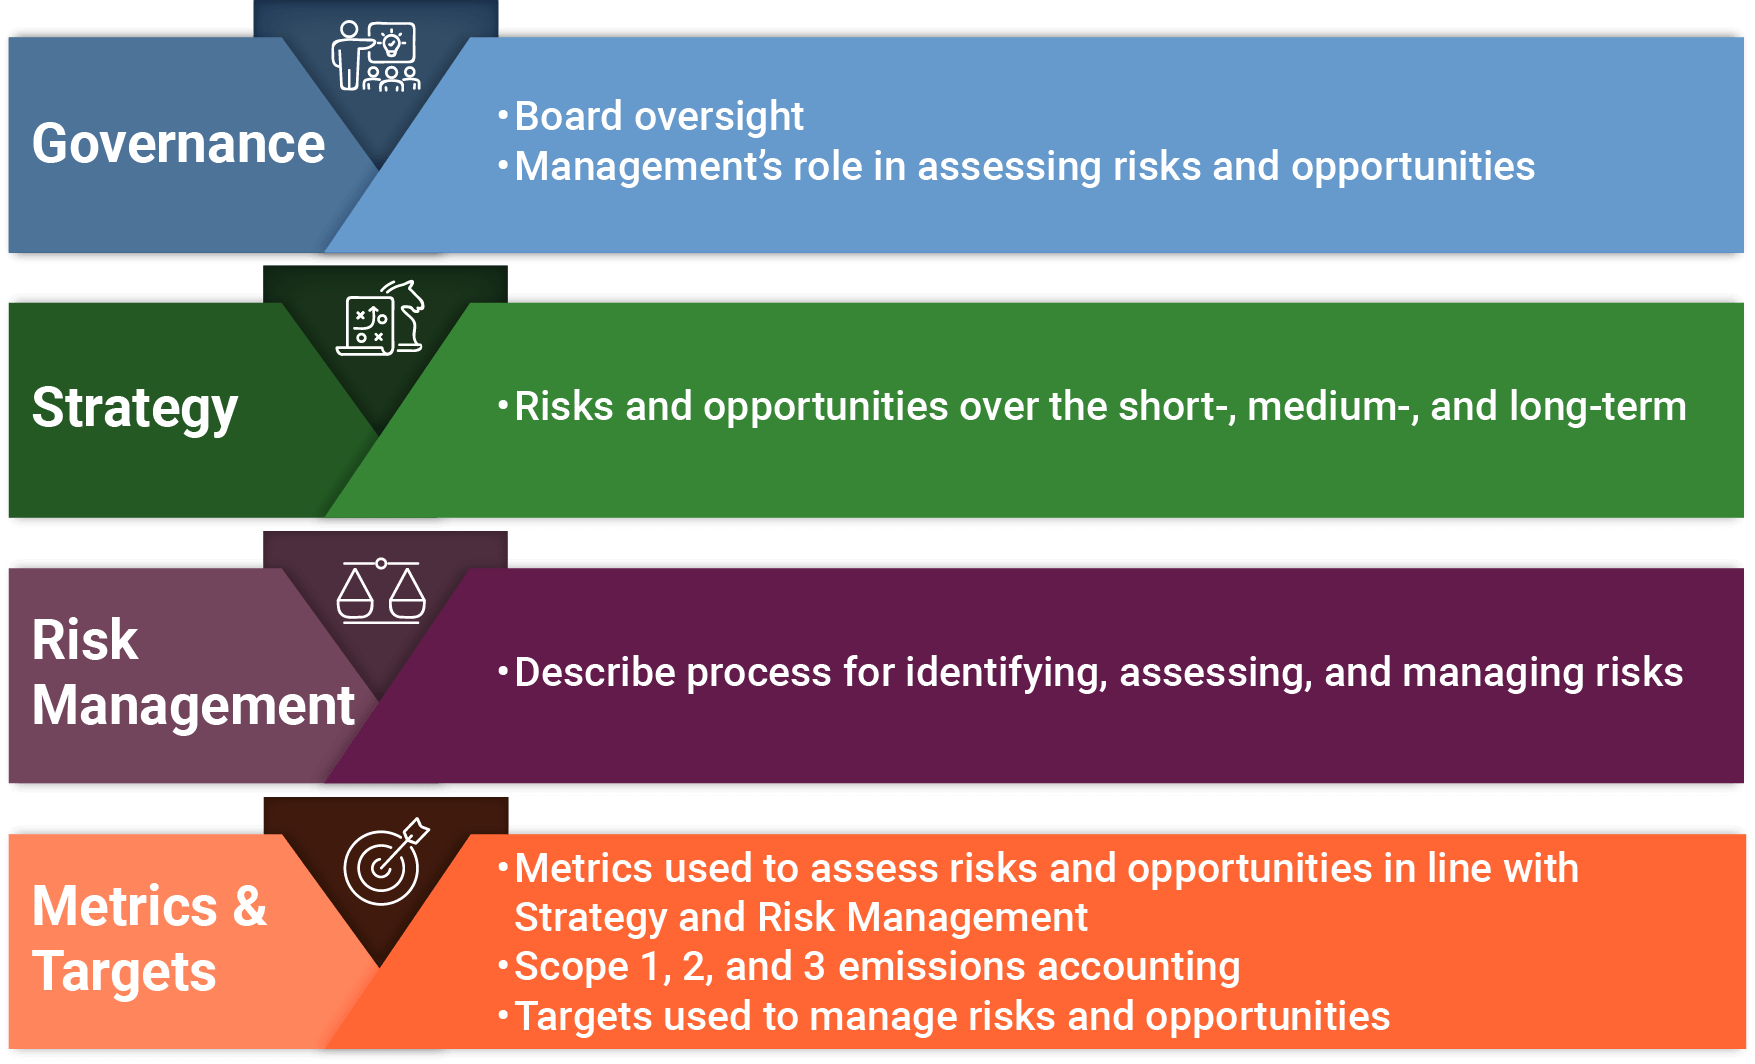 graphic with text summarizing governance, risk management, strategy, and metrics and targets